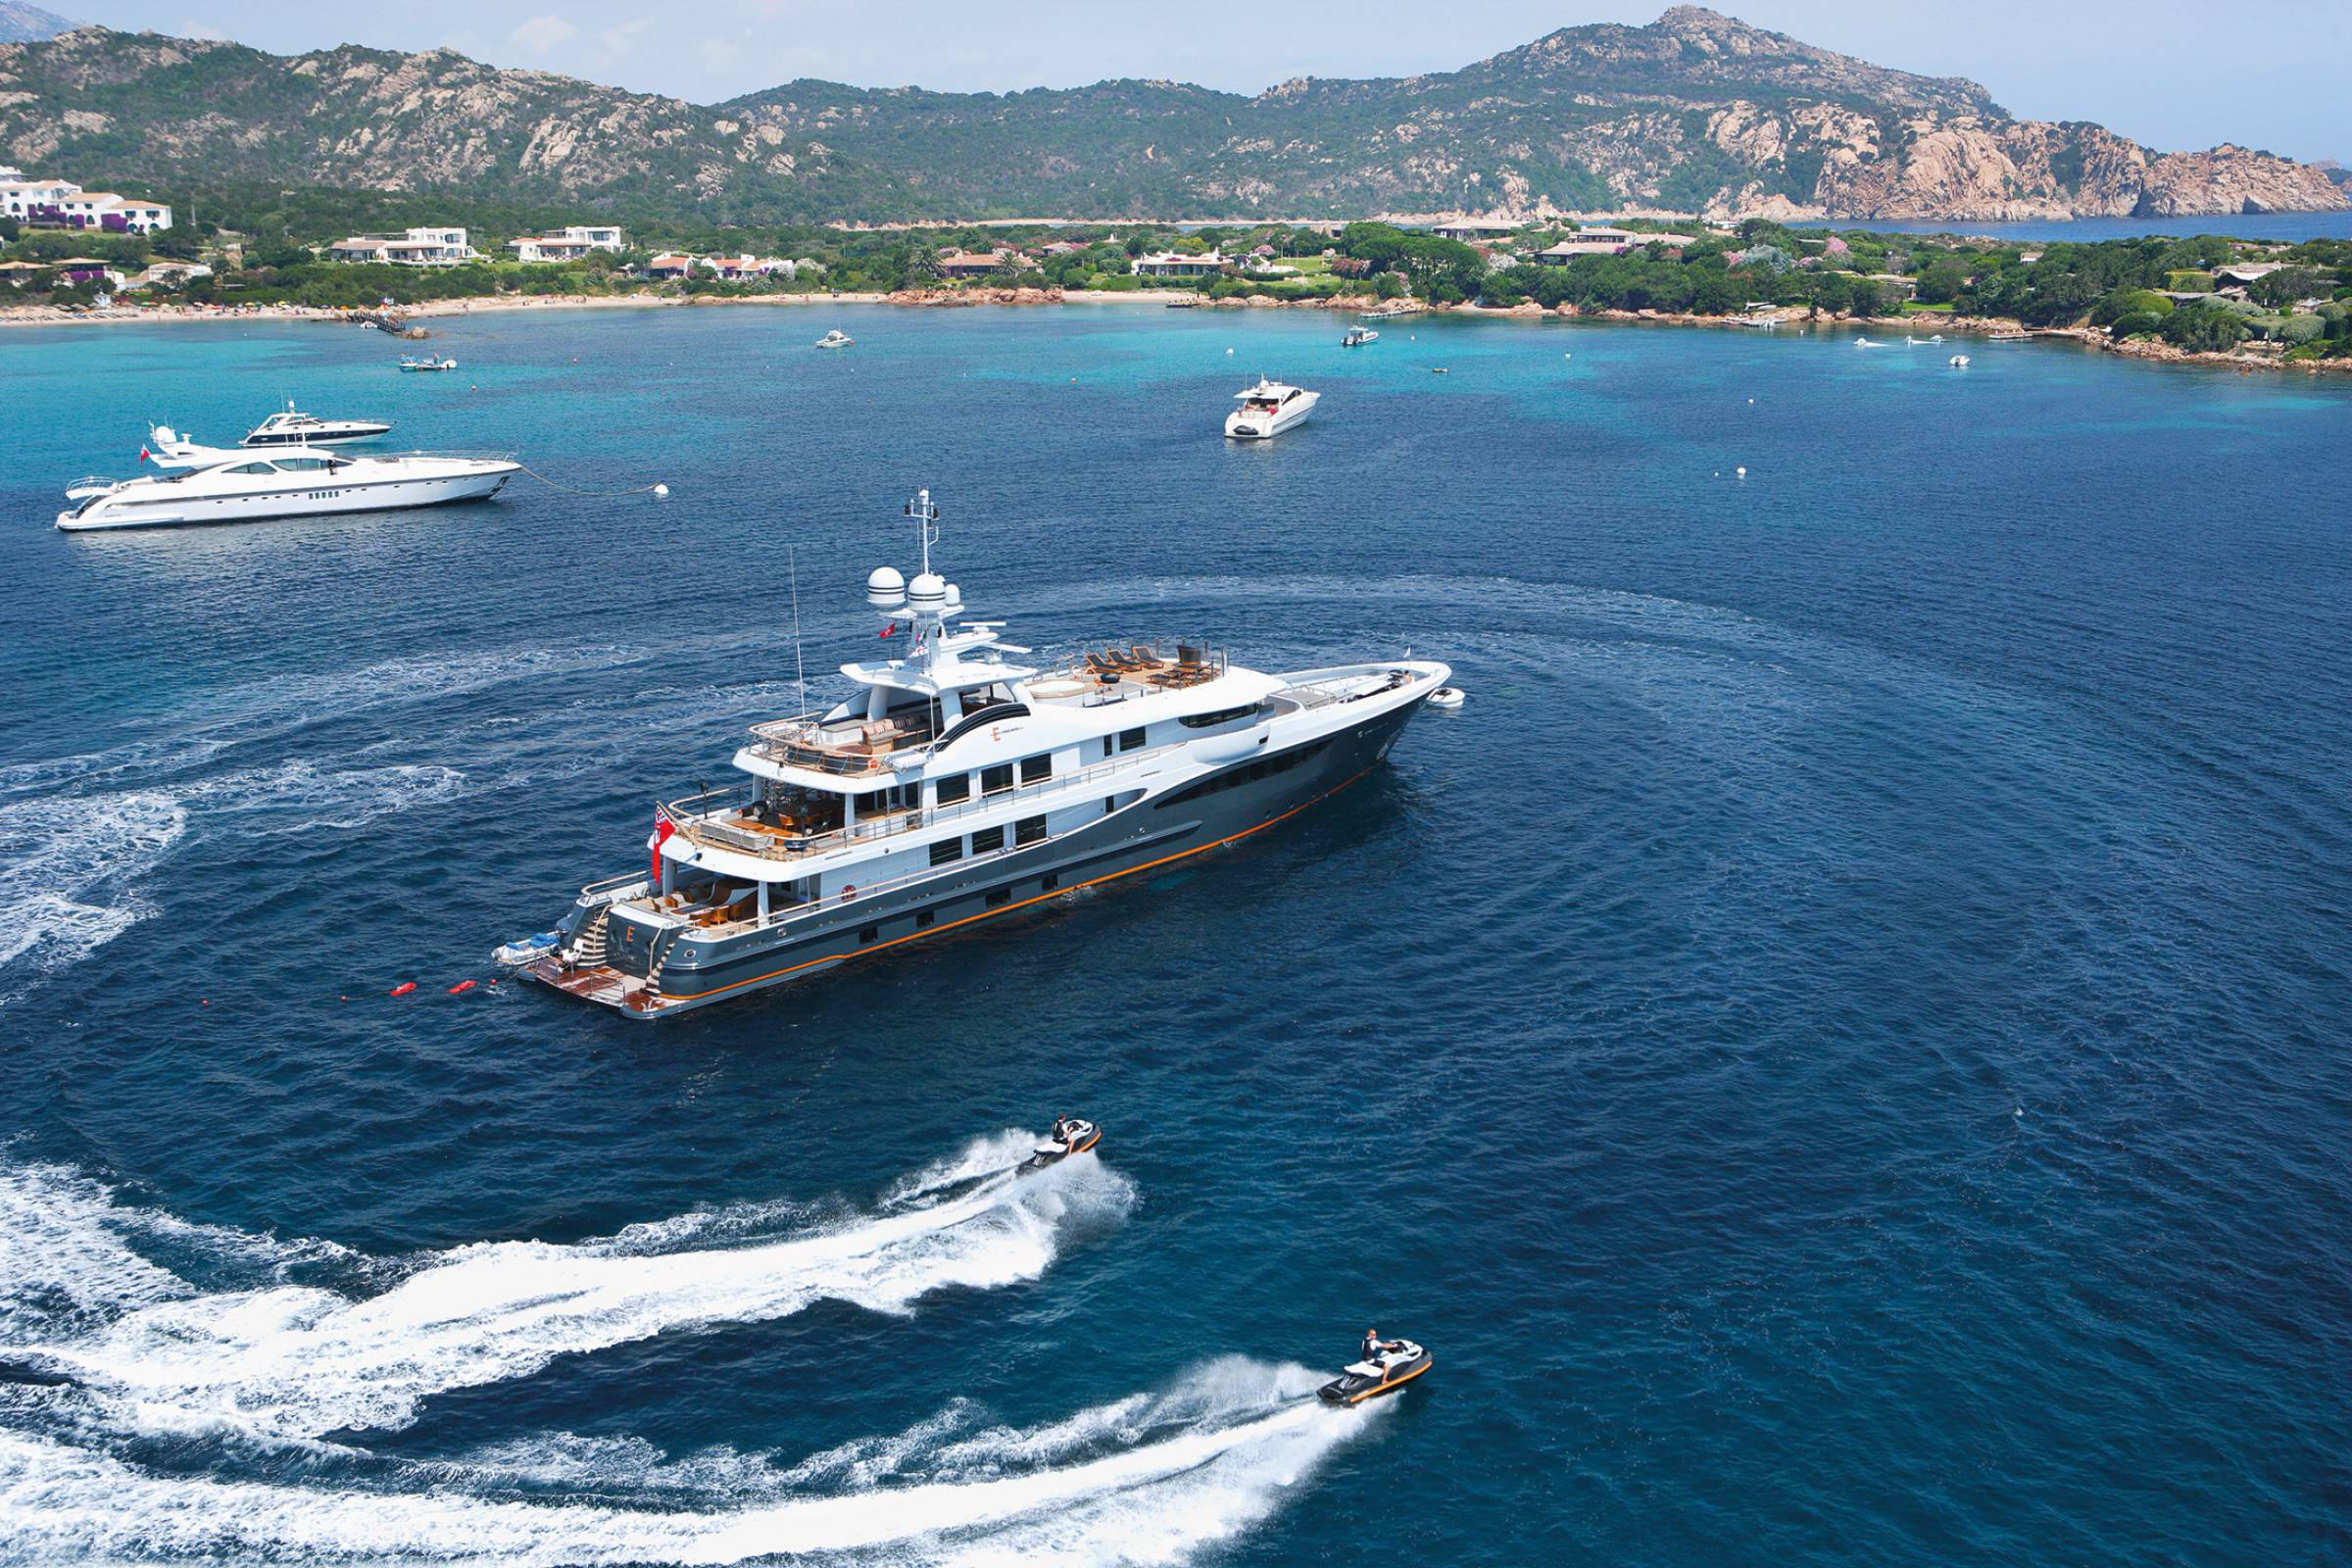 Amels 180 Yacht - Moored In The Mediterranean